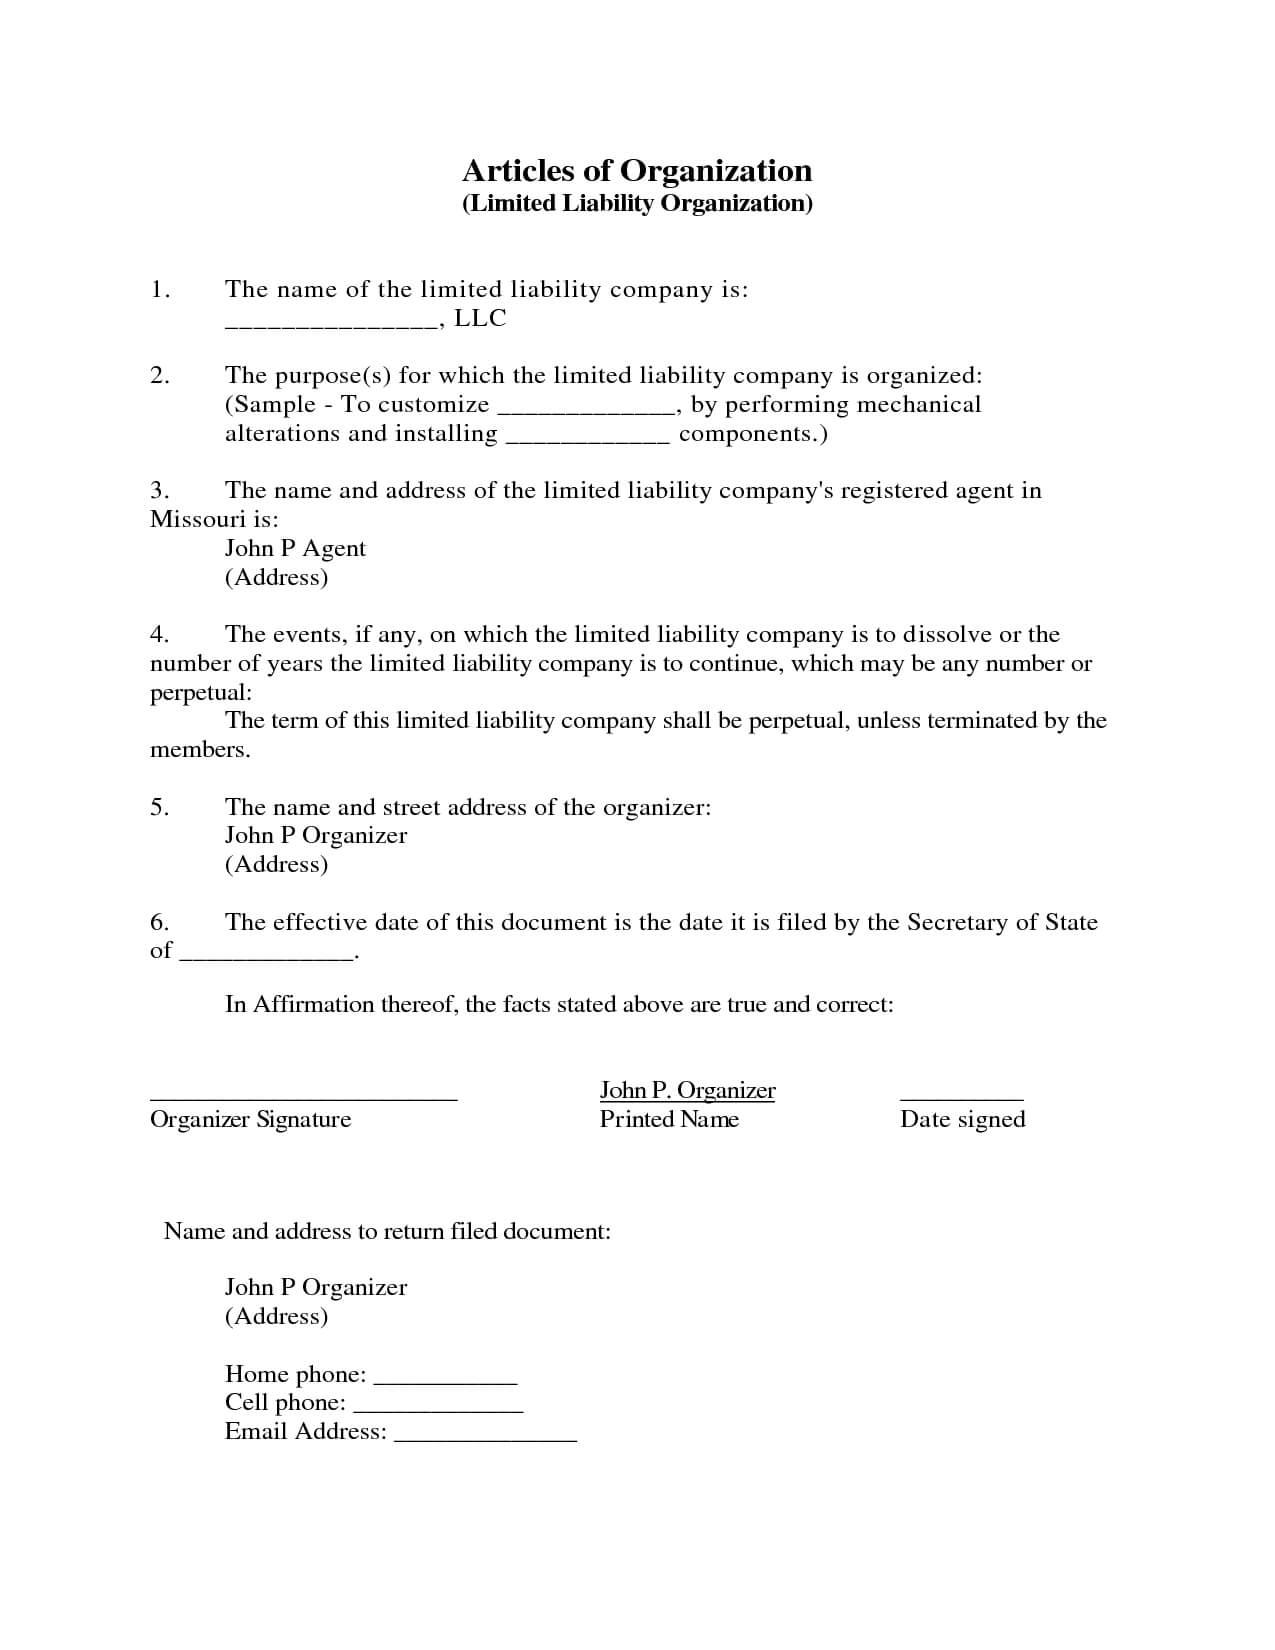 Articles Of Organization Sample Articles Of Incorporation Throughout Articles Of Organization Template